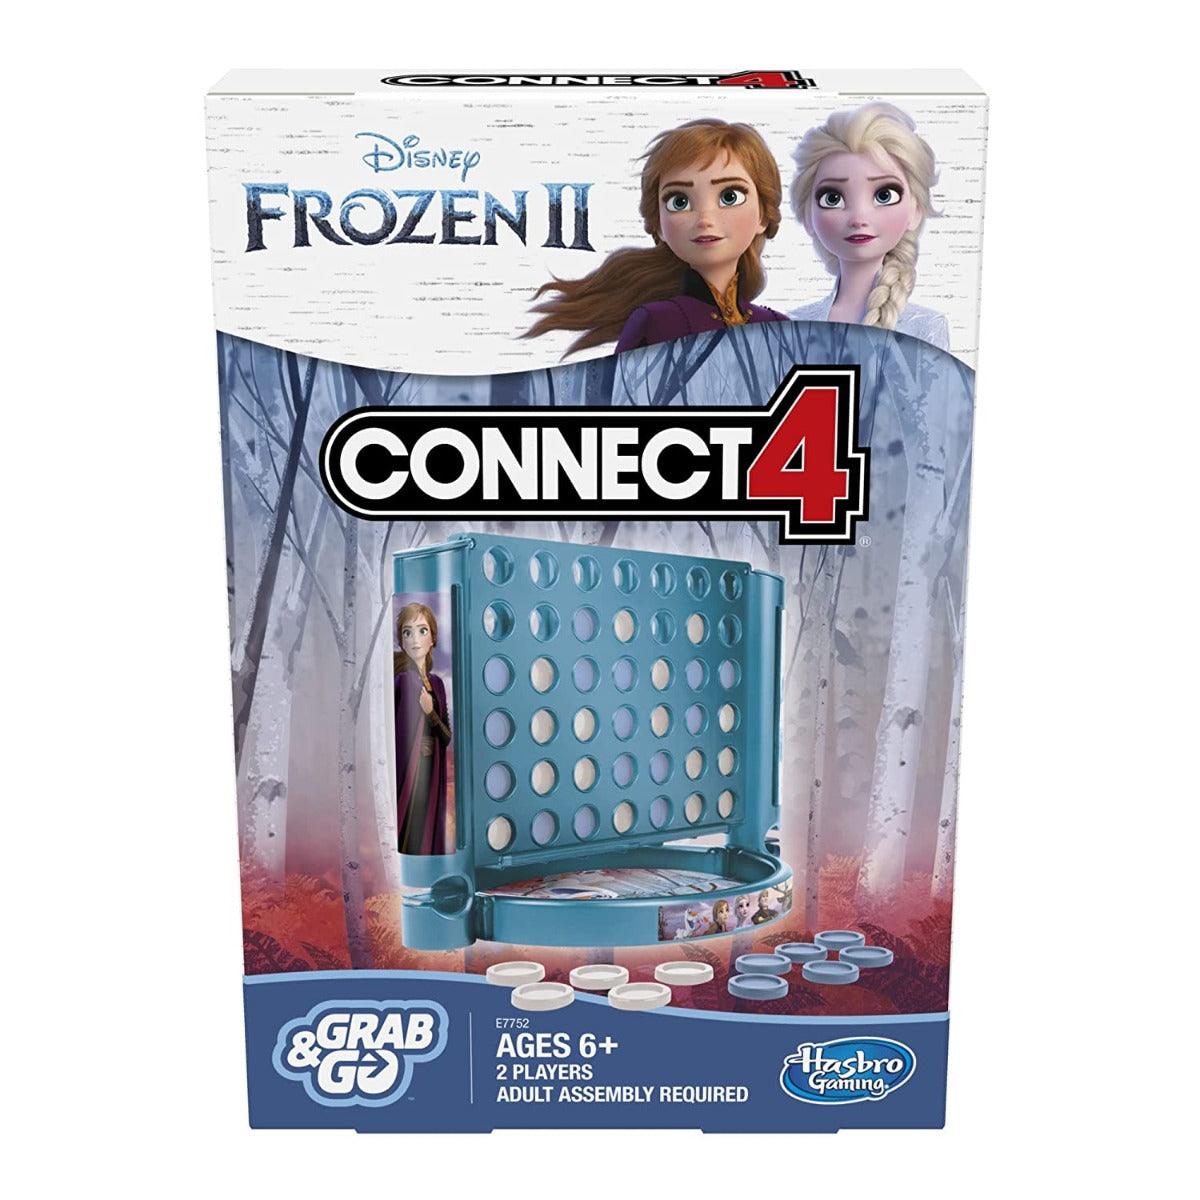 Hasbro Gaming Grab and Go Connect 4 Disney Frozen 2 Edition Game for Kids Ages 6 and Up